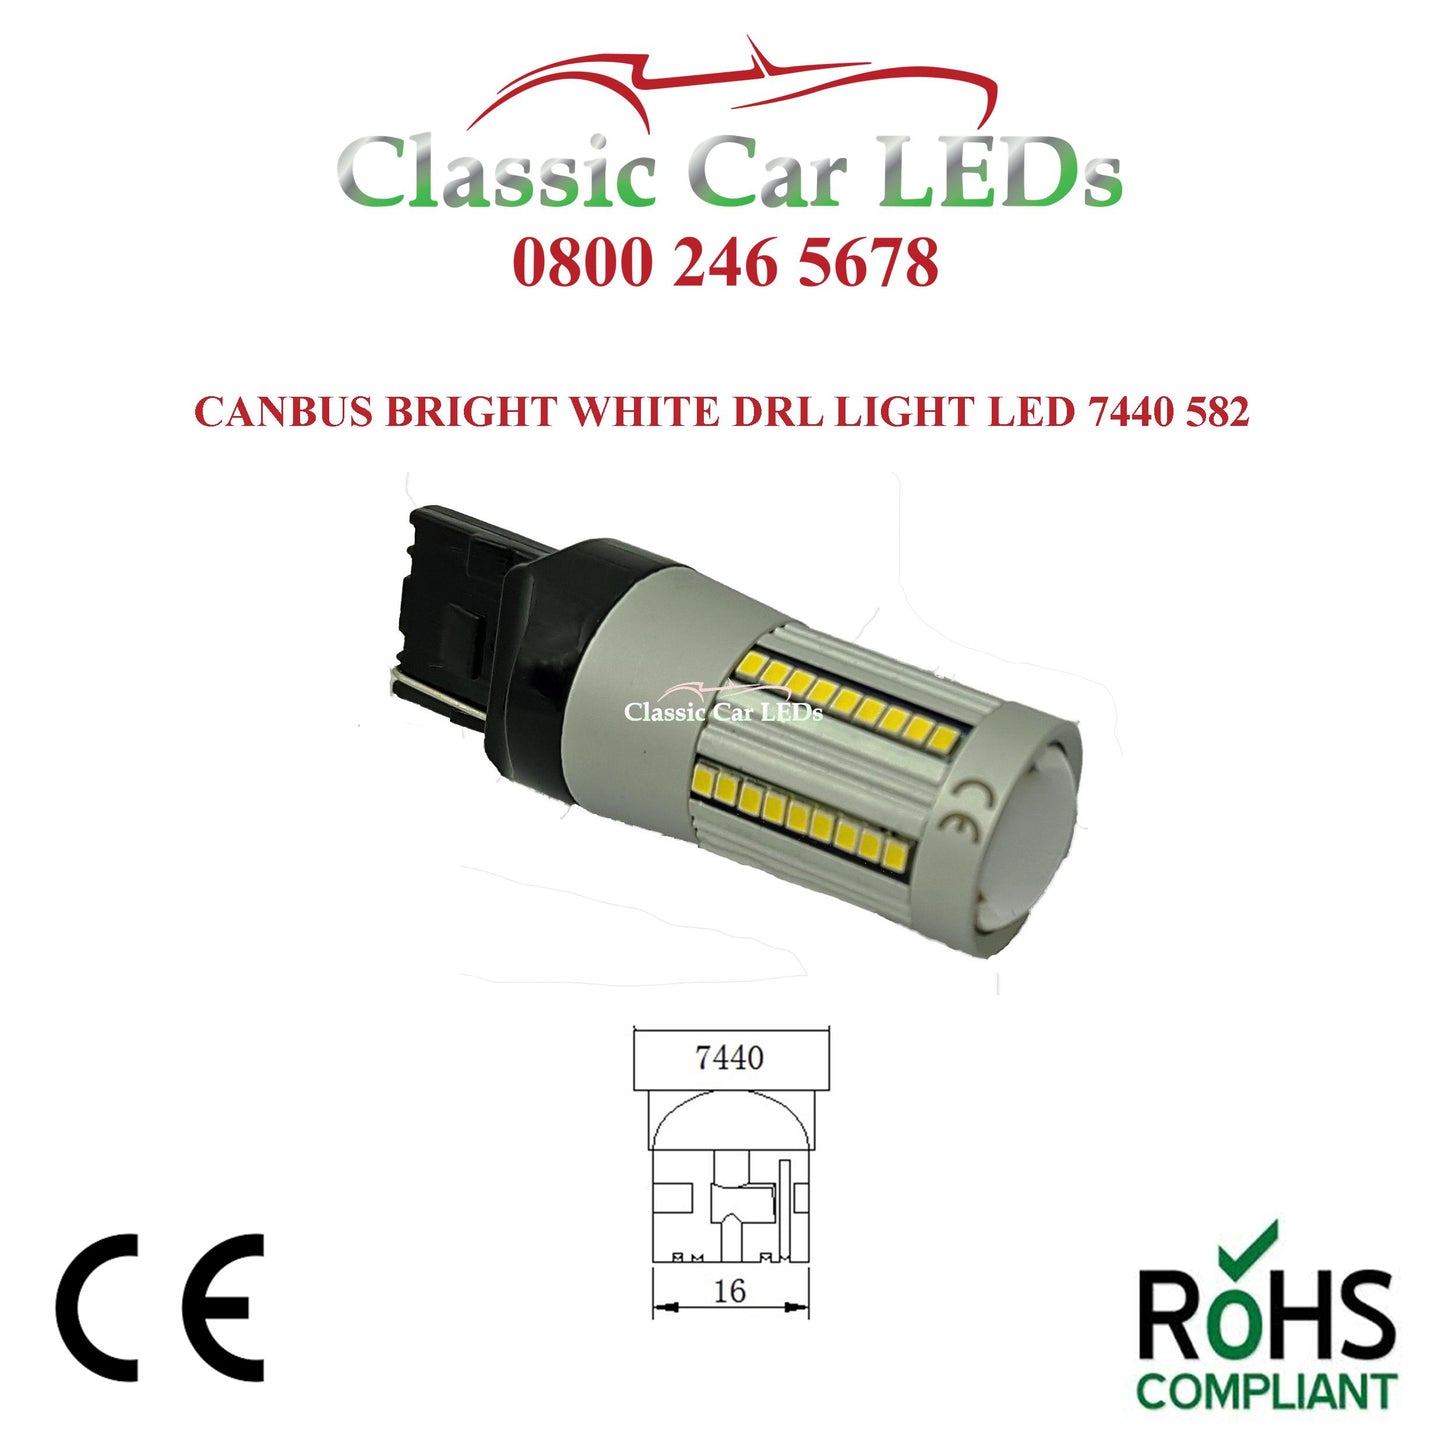 1 x Strong Canbus Daylight Running DRL Reverse White LED 7440 W21W T20 582  – Classic Car LEDs Ltd